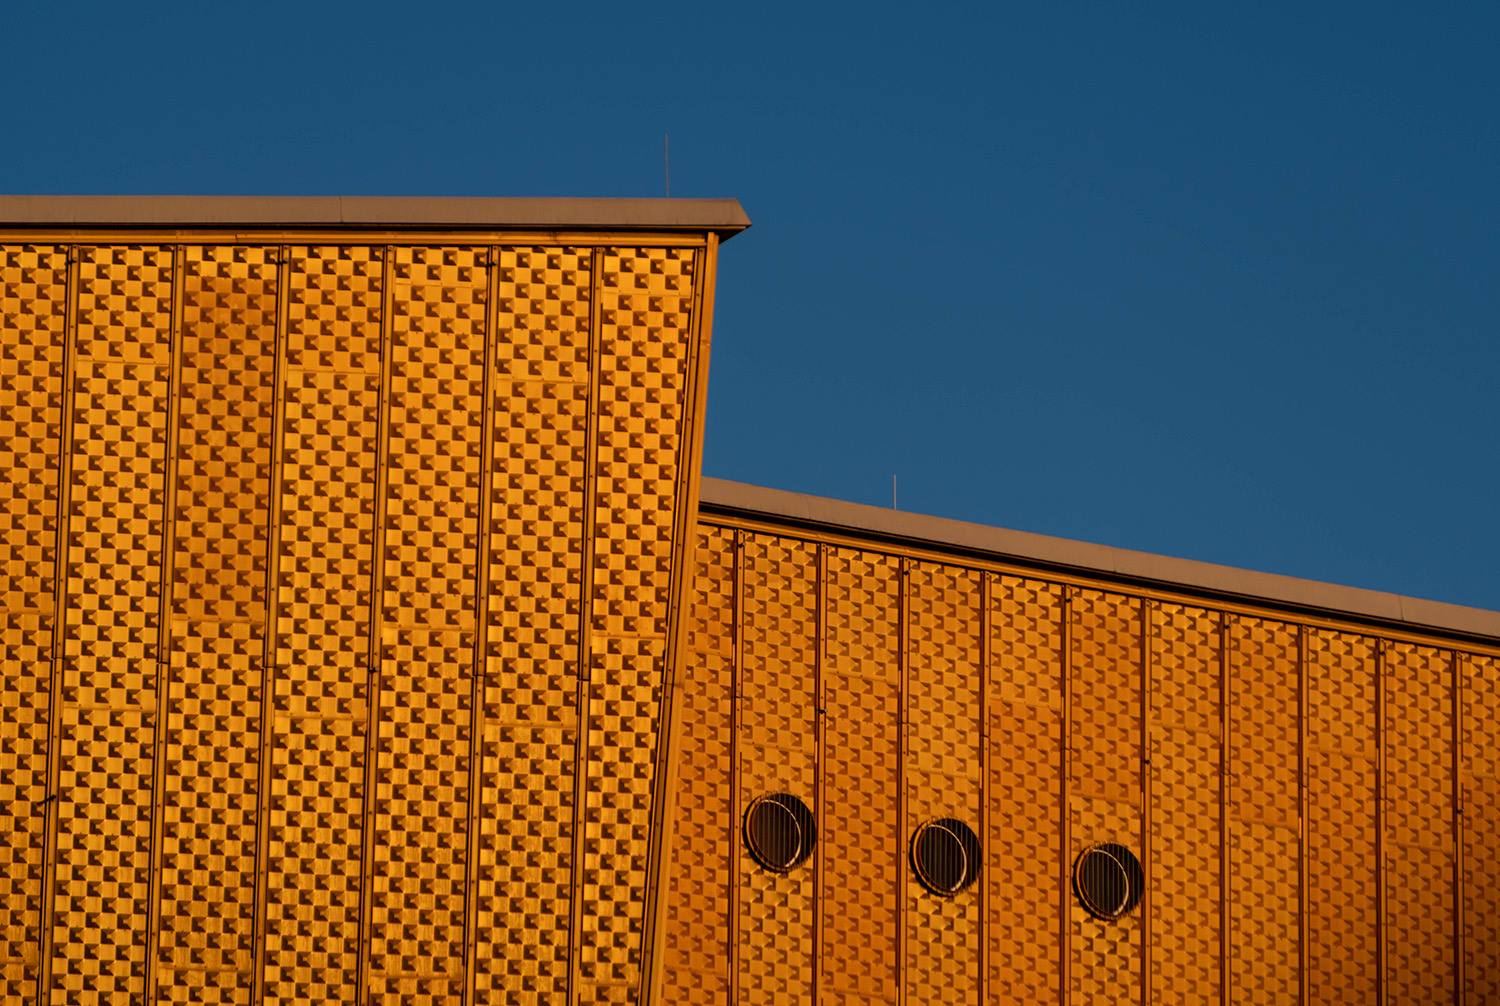 <p>A detail of the golden cladding and angular roofline of the Kammermusiksaal (chamber music hall) at the Philharmonie complex in Berlin.</p>